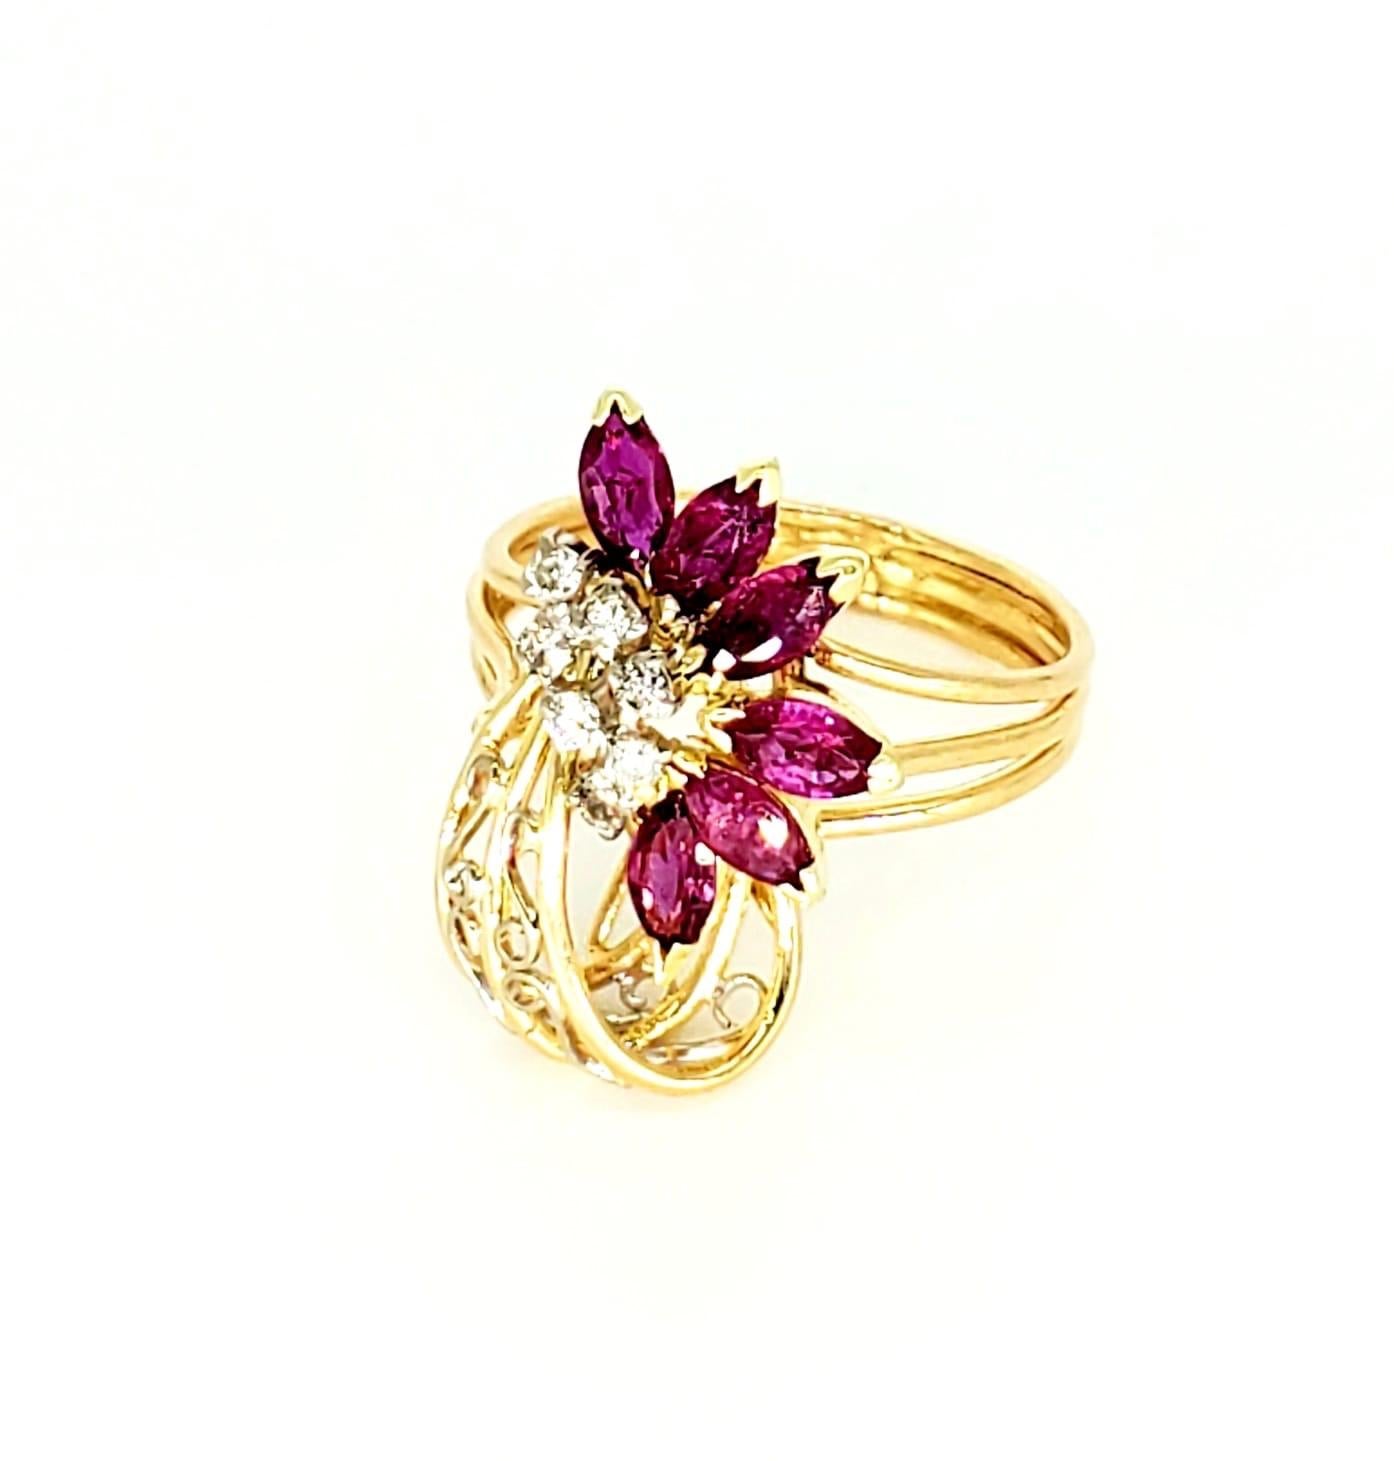 Vintage 1.60 Carat Ruby & Diamond Flower Cocktail Ring. The ring features marquise Ruby’s weighting approx 1.50 carat and round diamonds weighing approx 0.10 carat. The ring is beautifully handcrafted to perfection with very precise details making